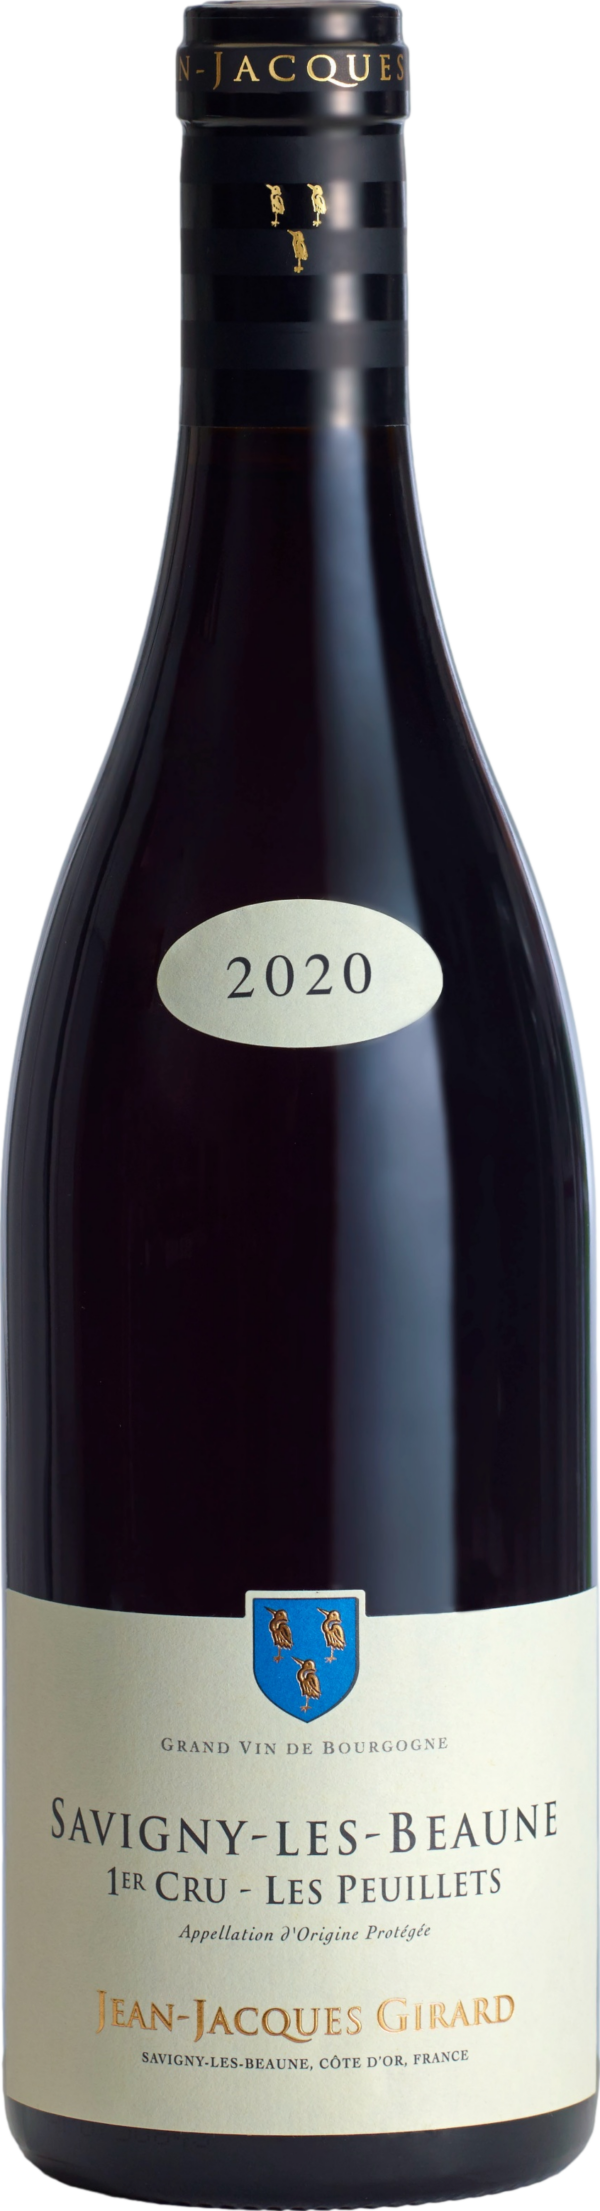 Product image of Domaine Jean-Jacques Girard Savigny les Beaune Premier Cru Les Peuillets 2020 from 8wines